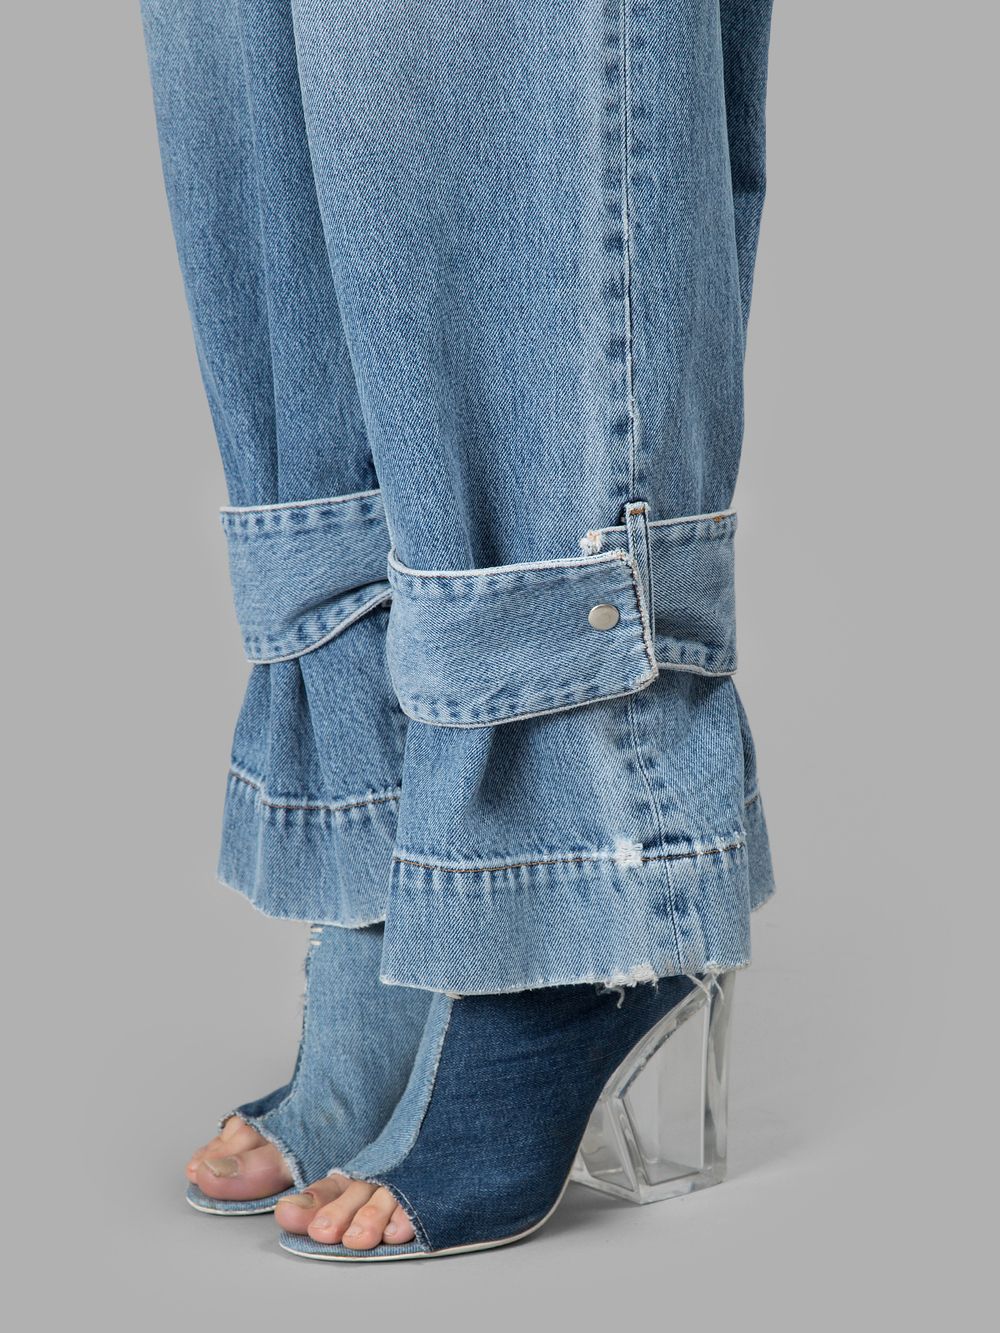 How to Wear Denim Shoes: 13 Youthful & Chic Outfit Ideas for Ladies